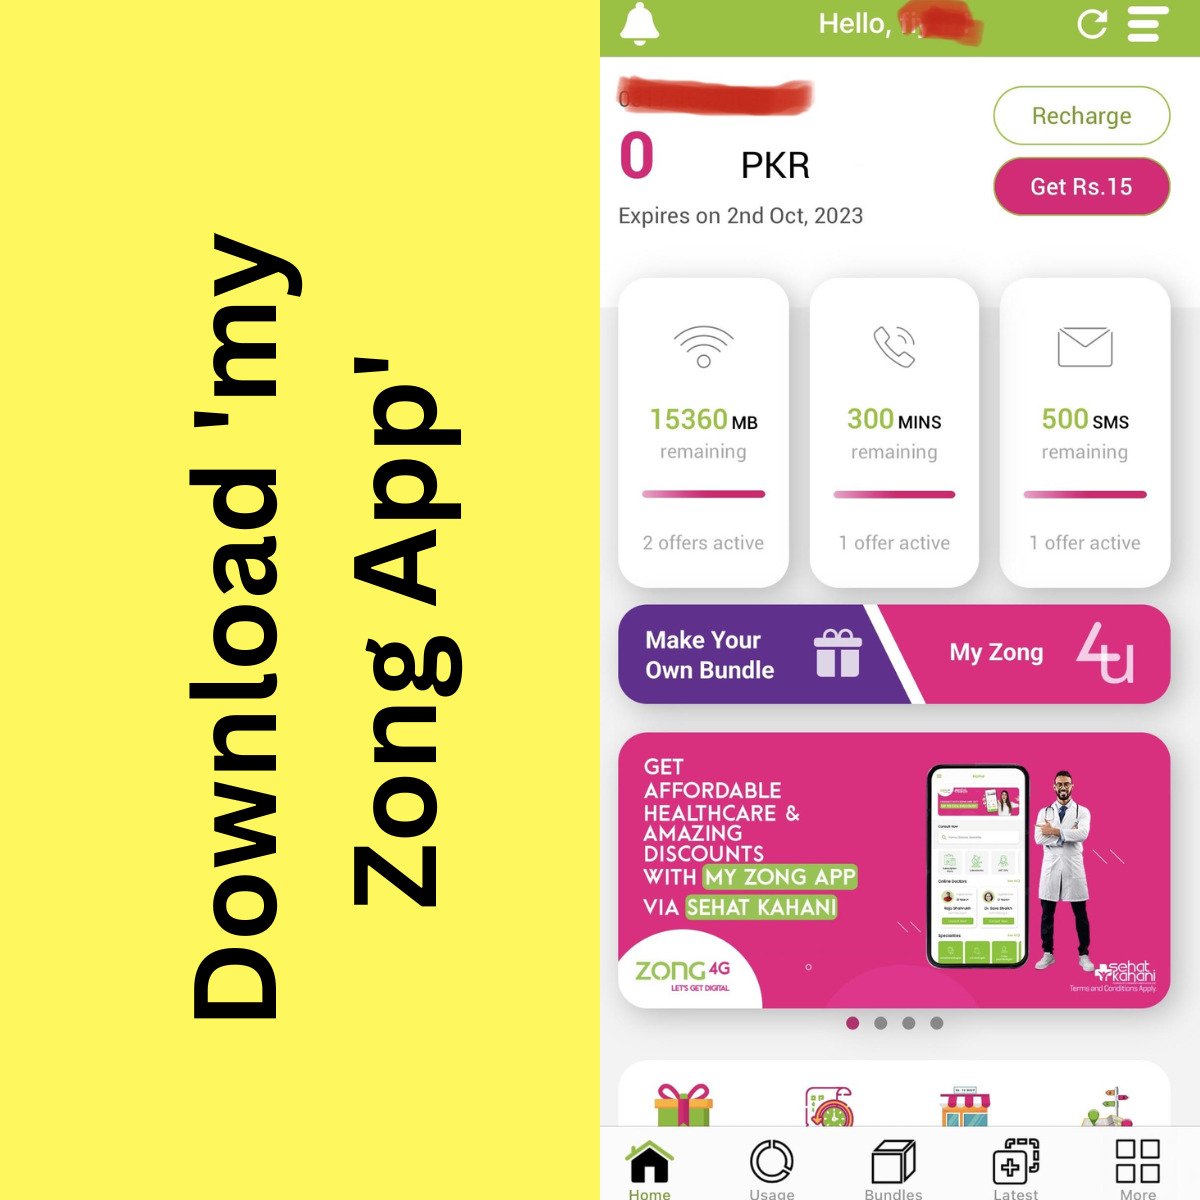 download 'my Zong app' to download tax certificate